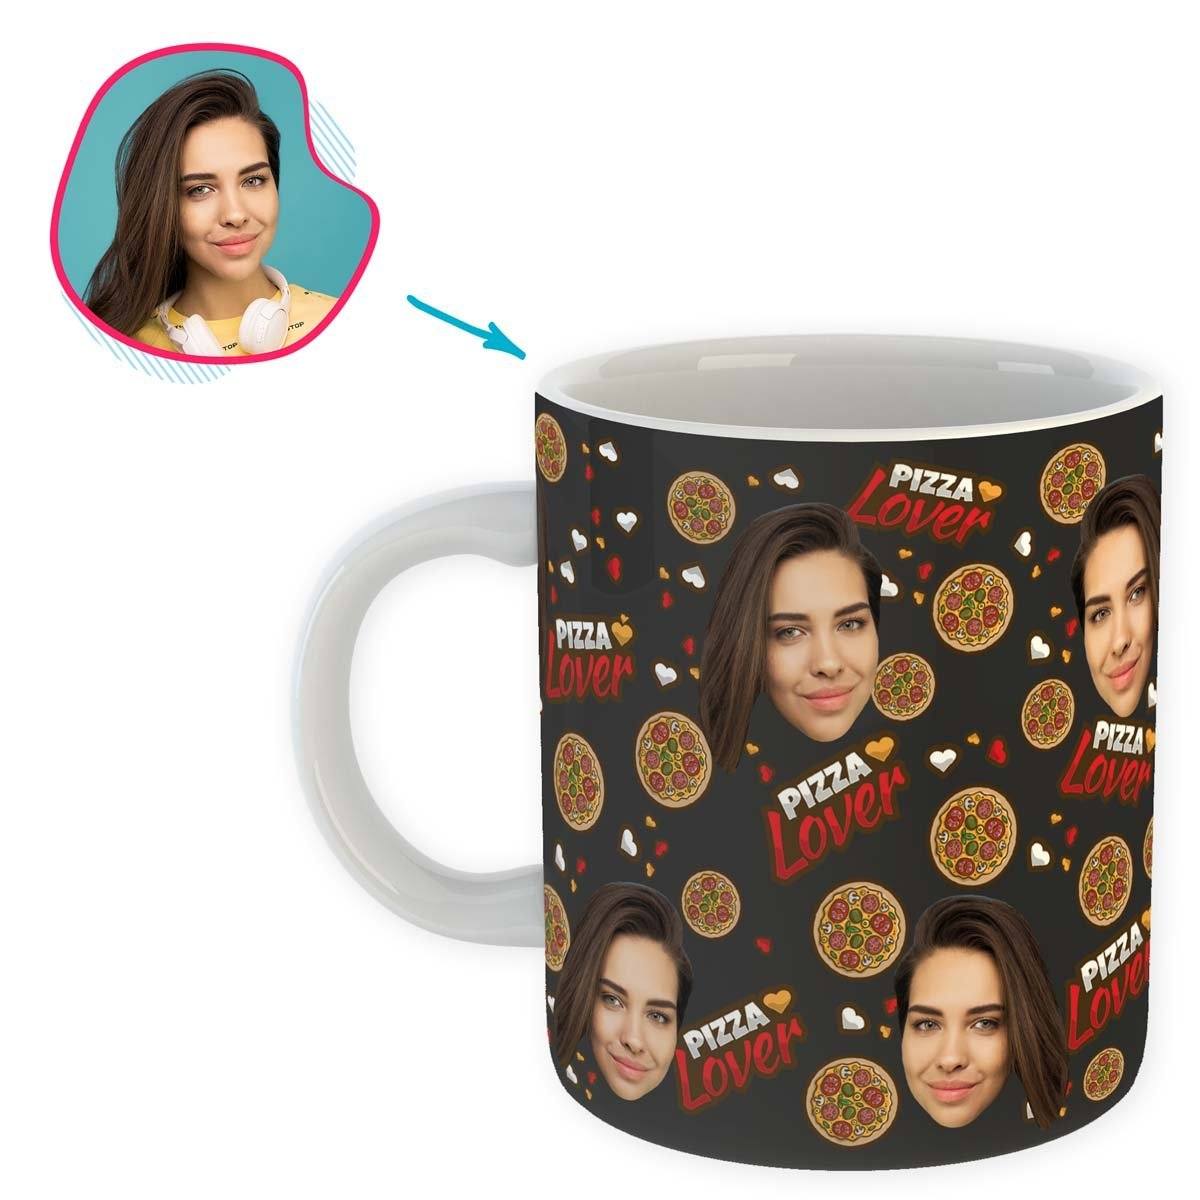 dark Pizza Lover mug personalized with photo of face printed on it